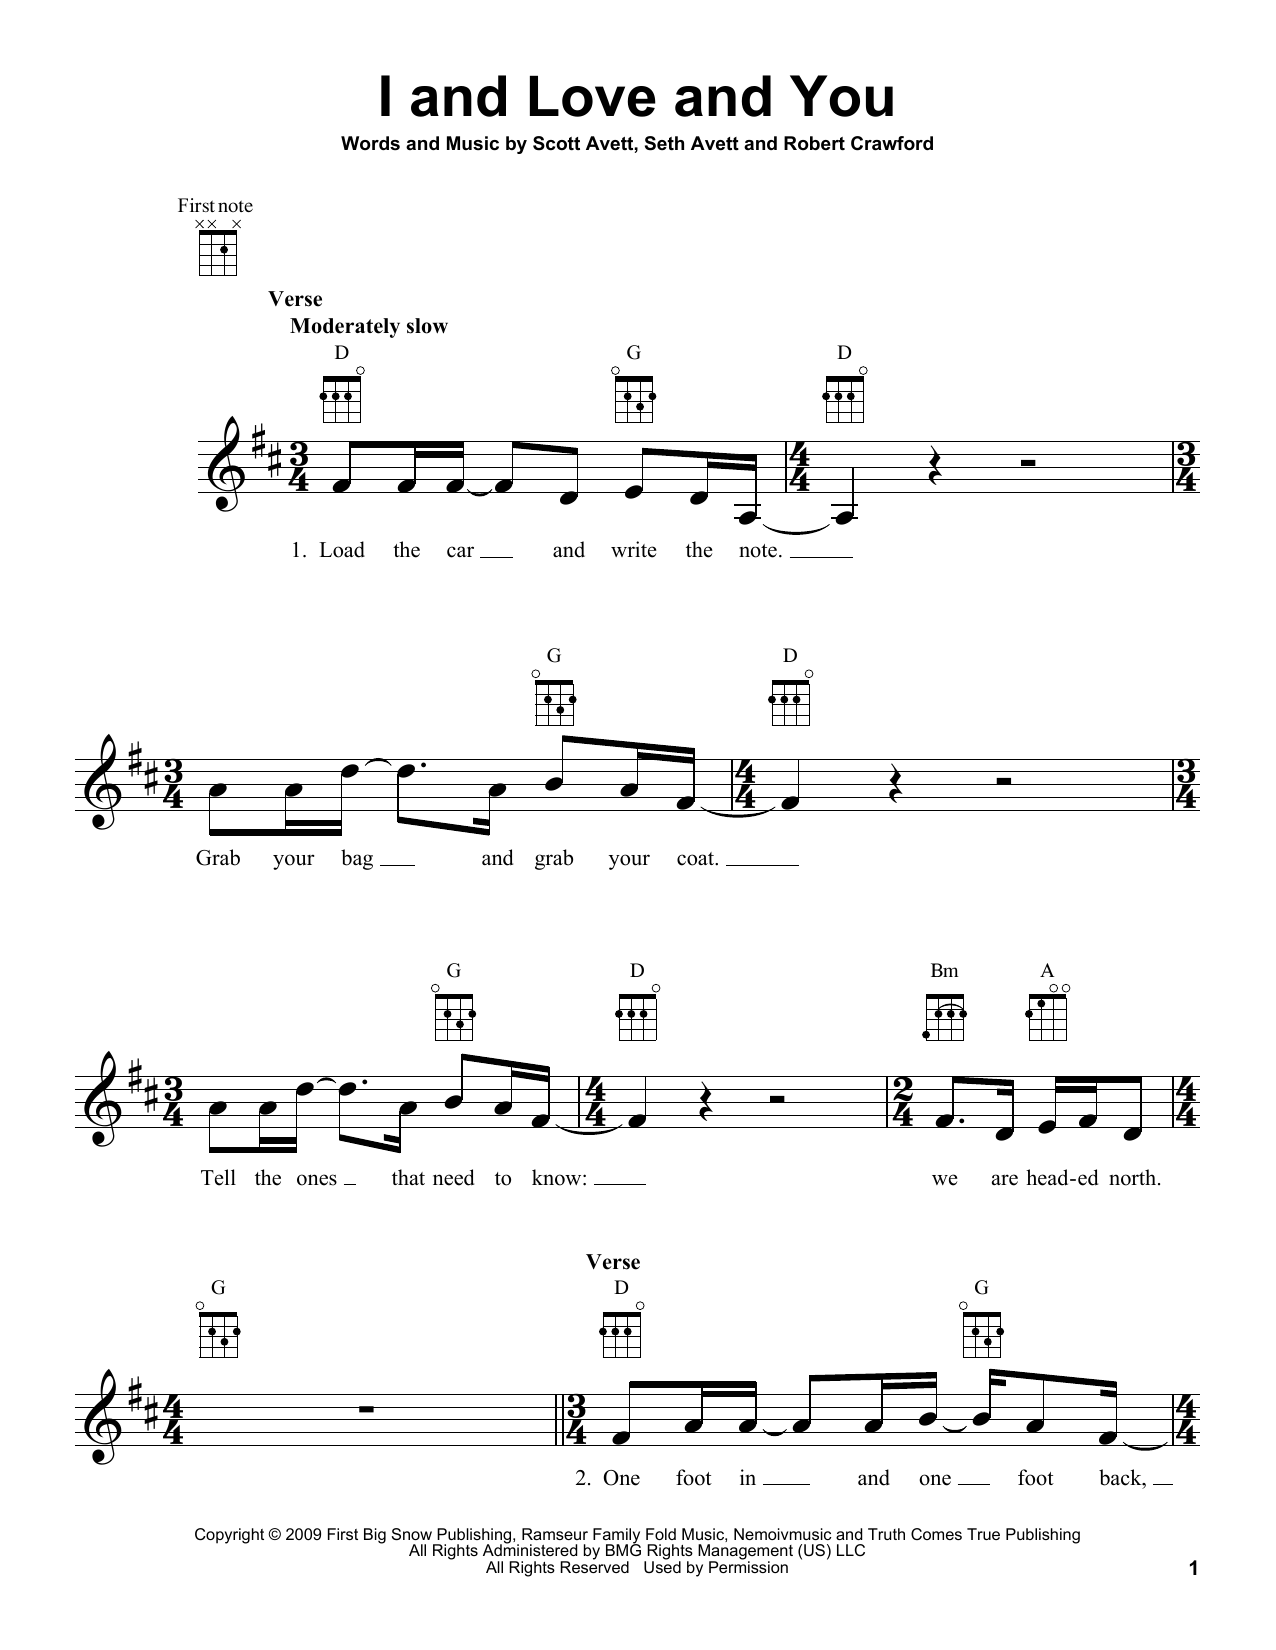 Download The Avett Brothers I And Love And You Sheet Music